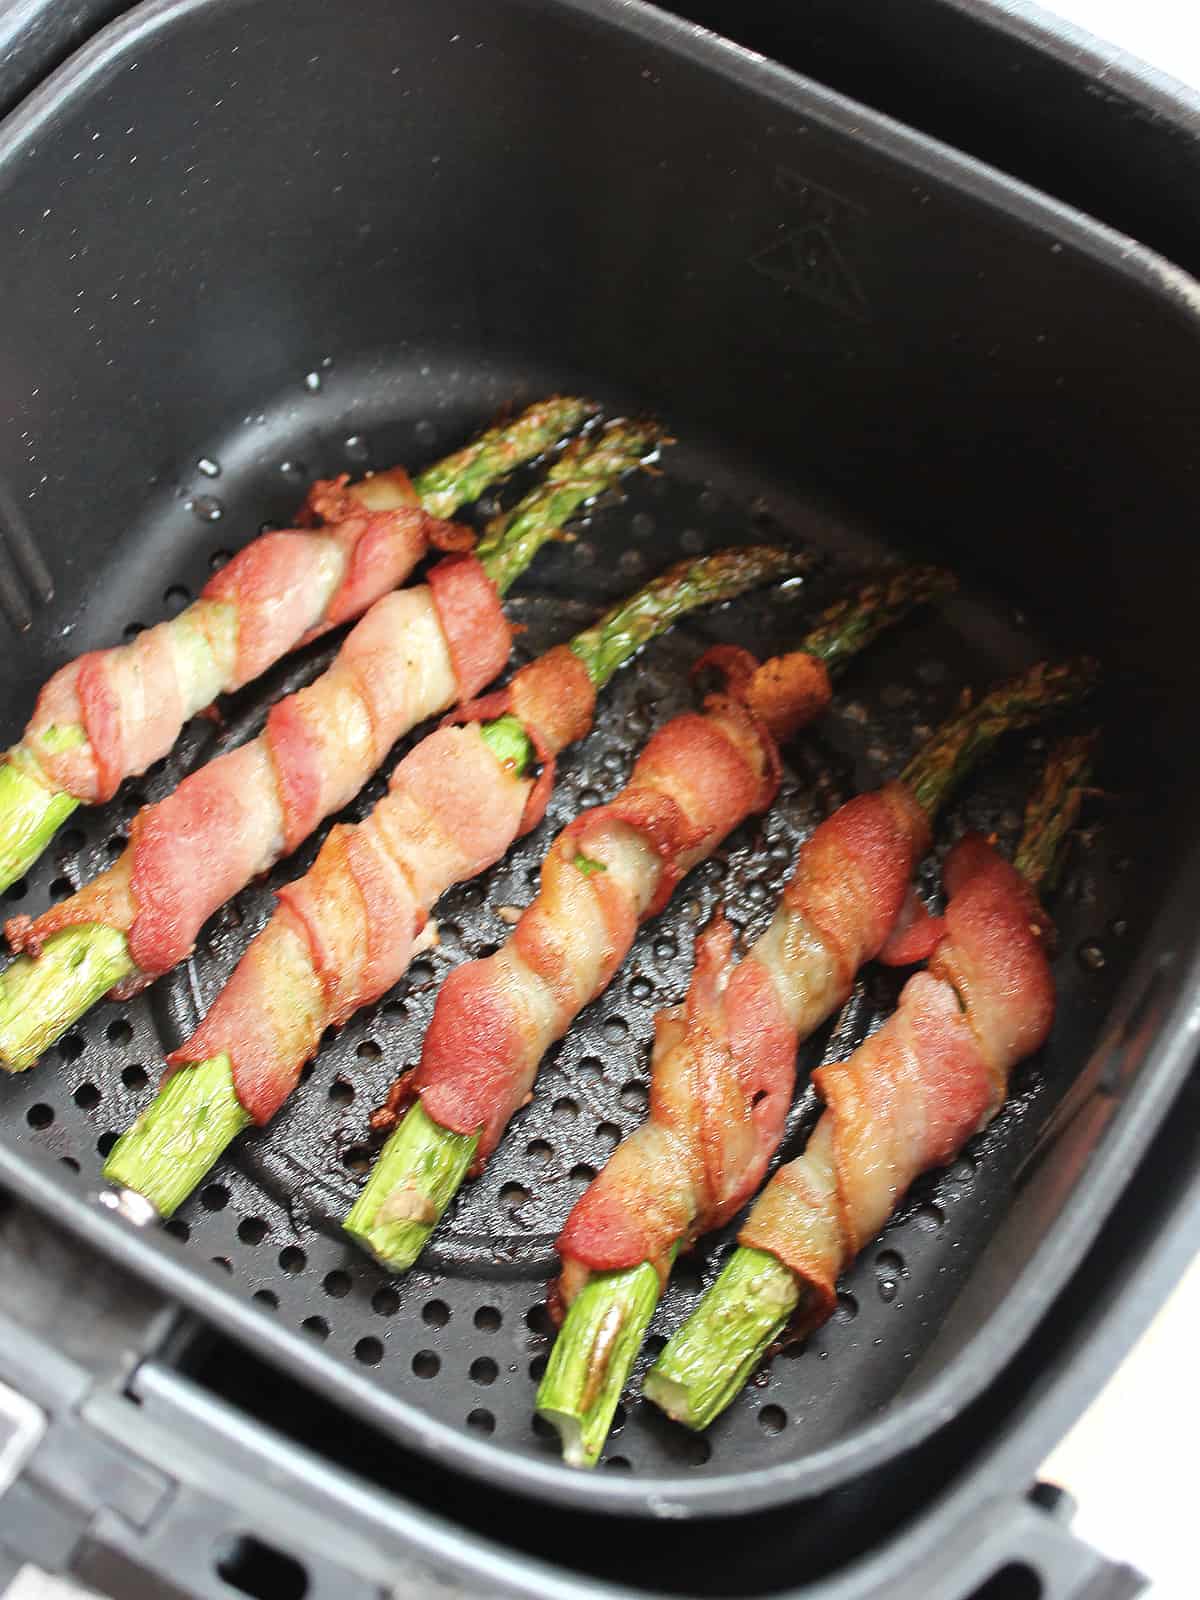 Bacon wrapped asparagus in an air fryer basket.